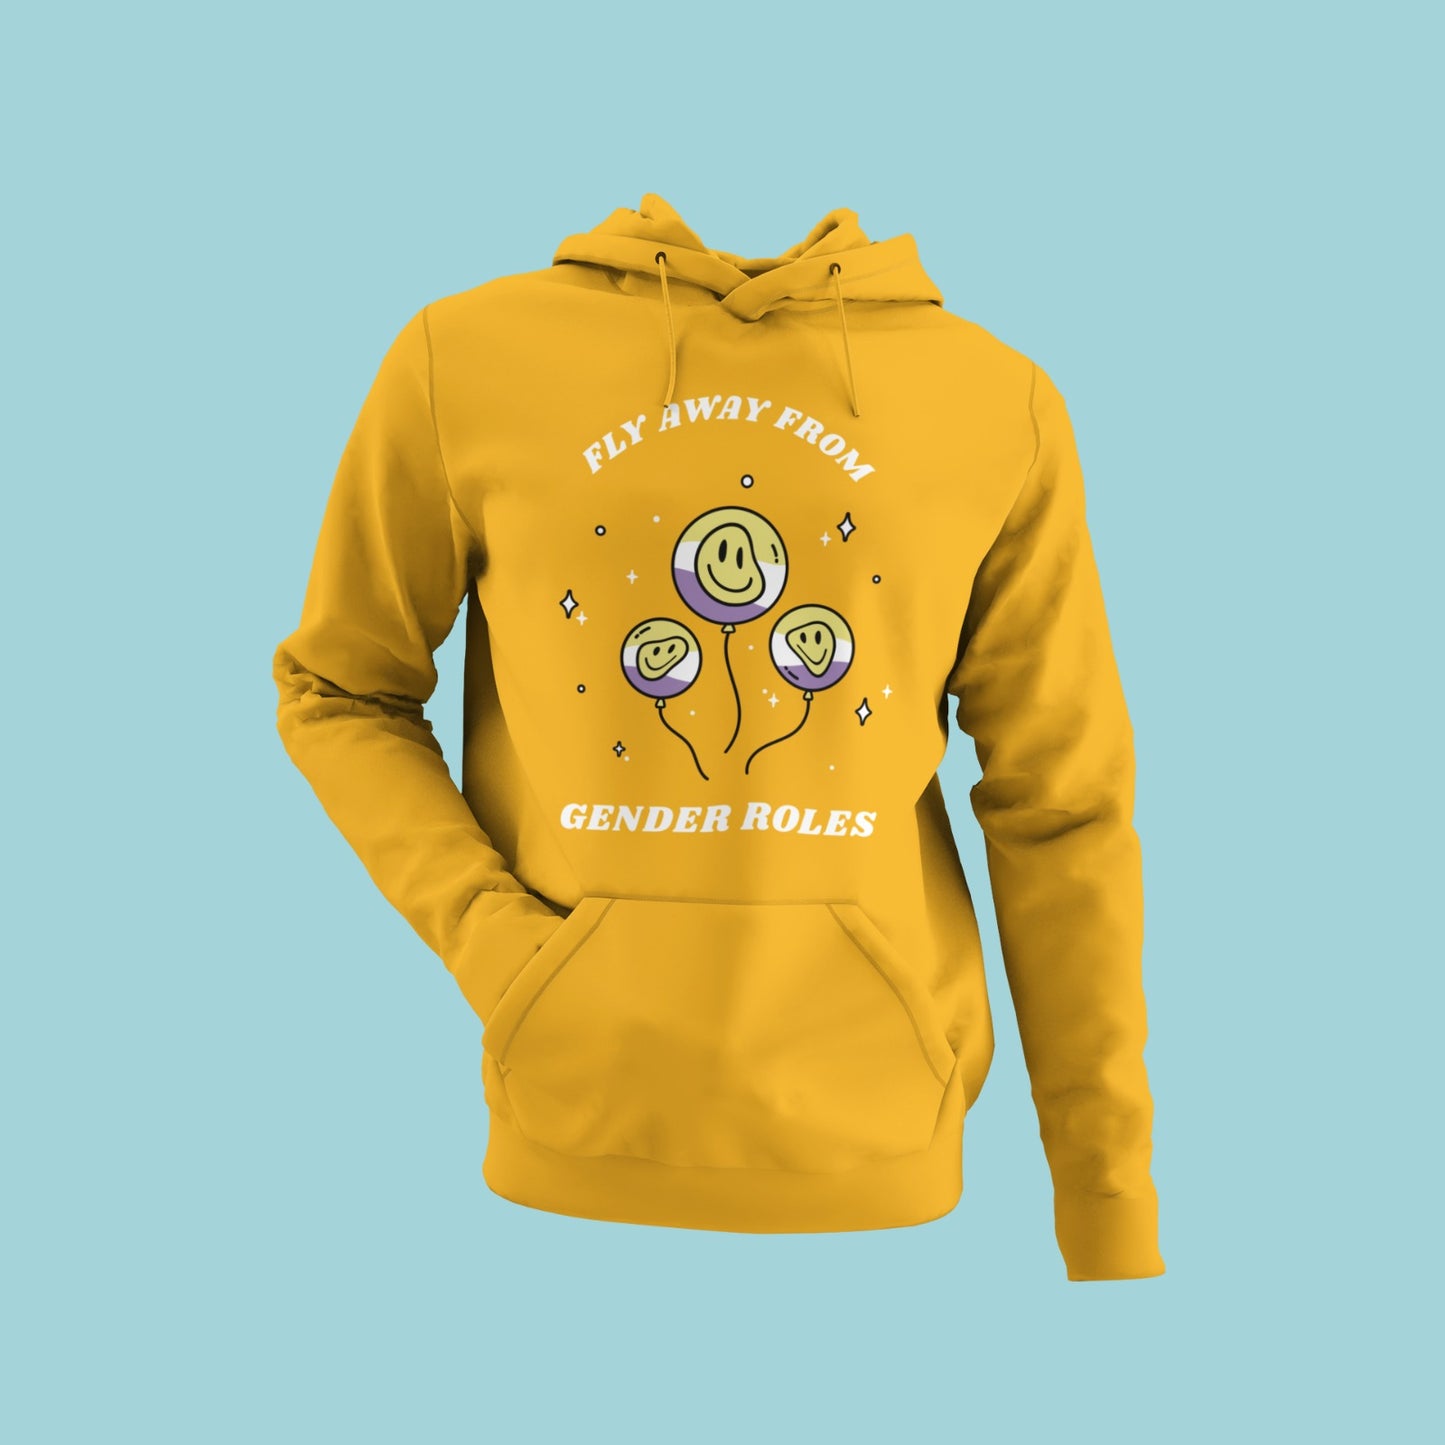 This yellow hoodie features a bold message "Fly Away From Gender Roles" with a graphic of three smiley-faced balloons floating away. Break free from societal norms with this unique and stylish piece. Perfect for those who value individuality and want to make a statement. Get ready to soar in this comfy and eye-catching hoodie!